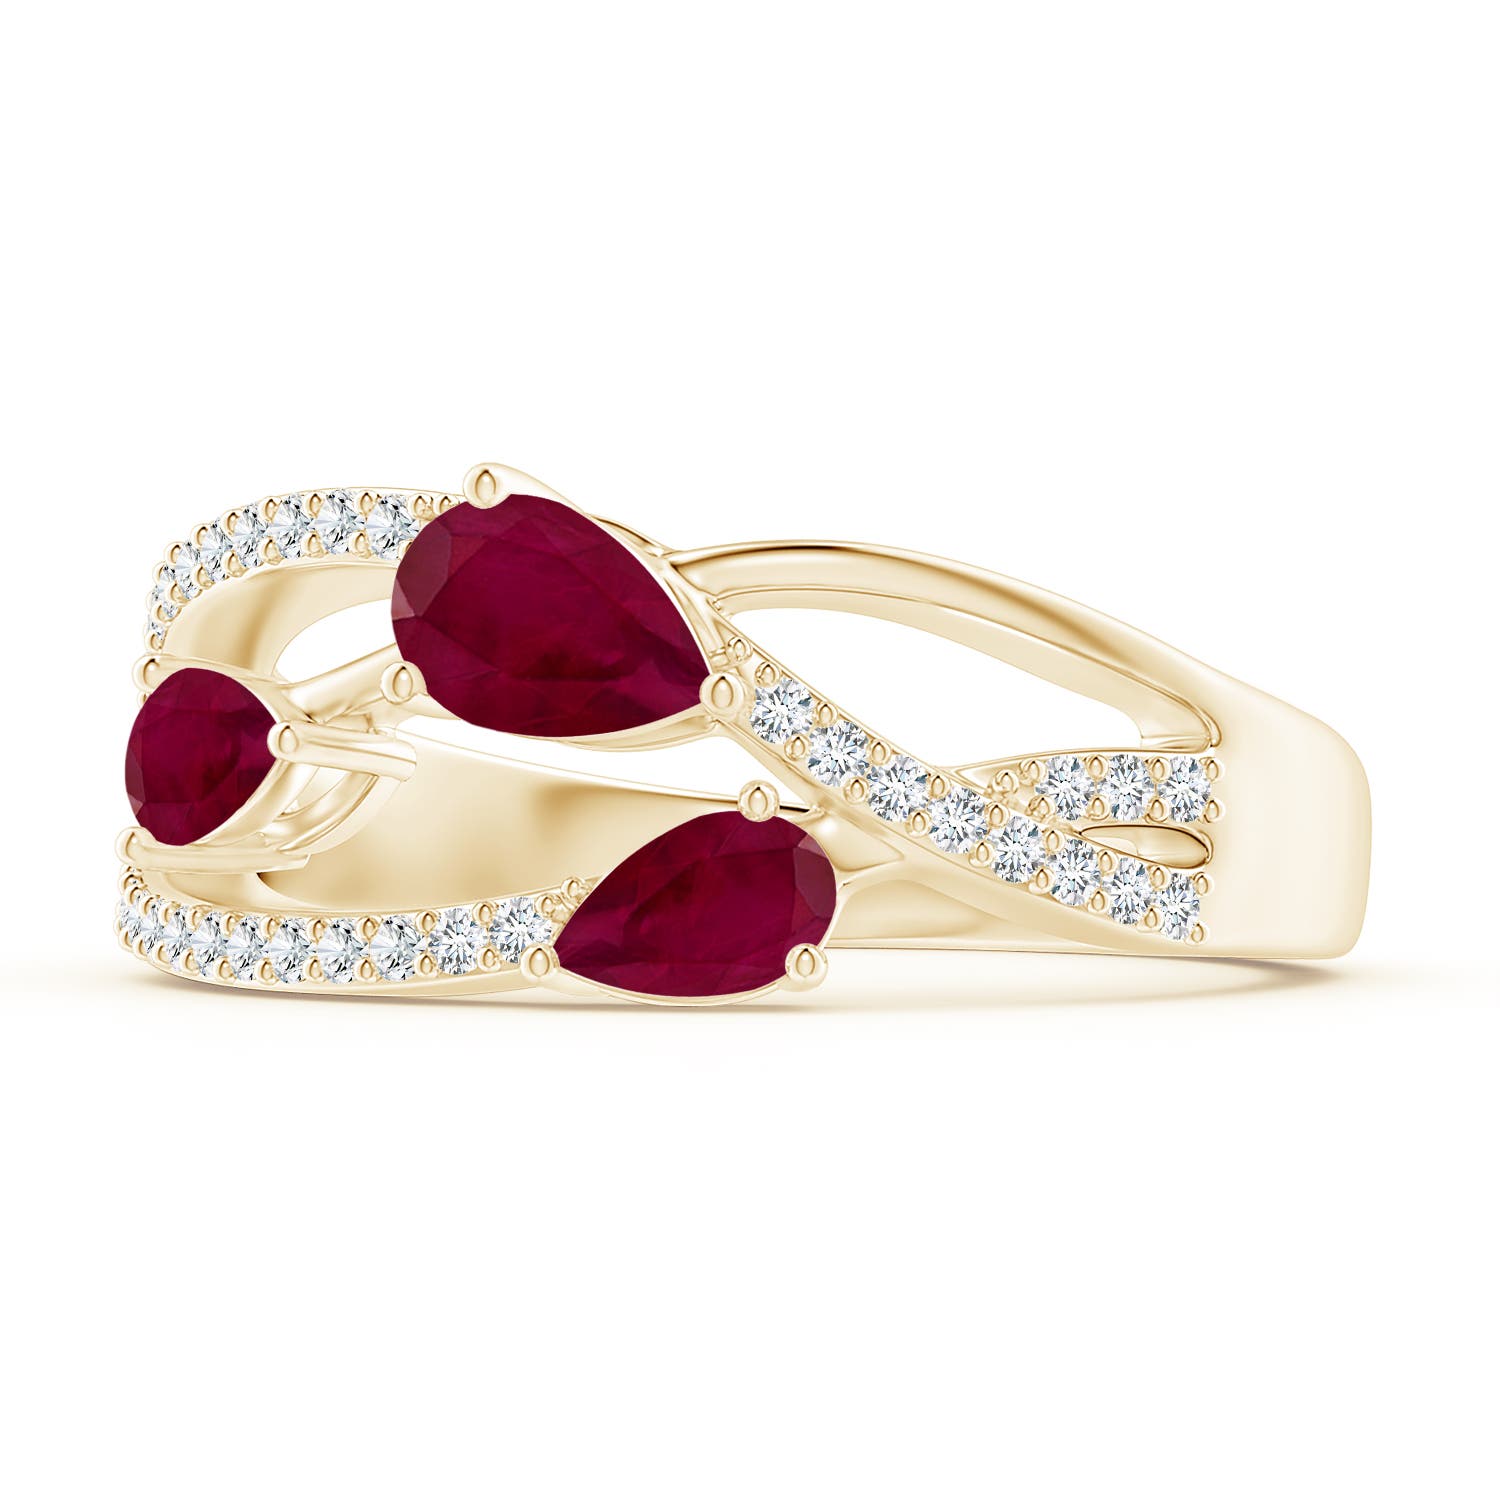 A - Ruby / 1.03 CT / 14 KT Yellow Gold